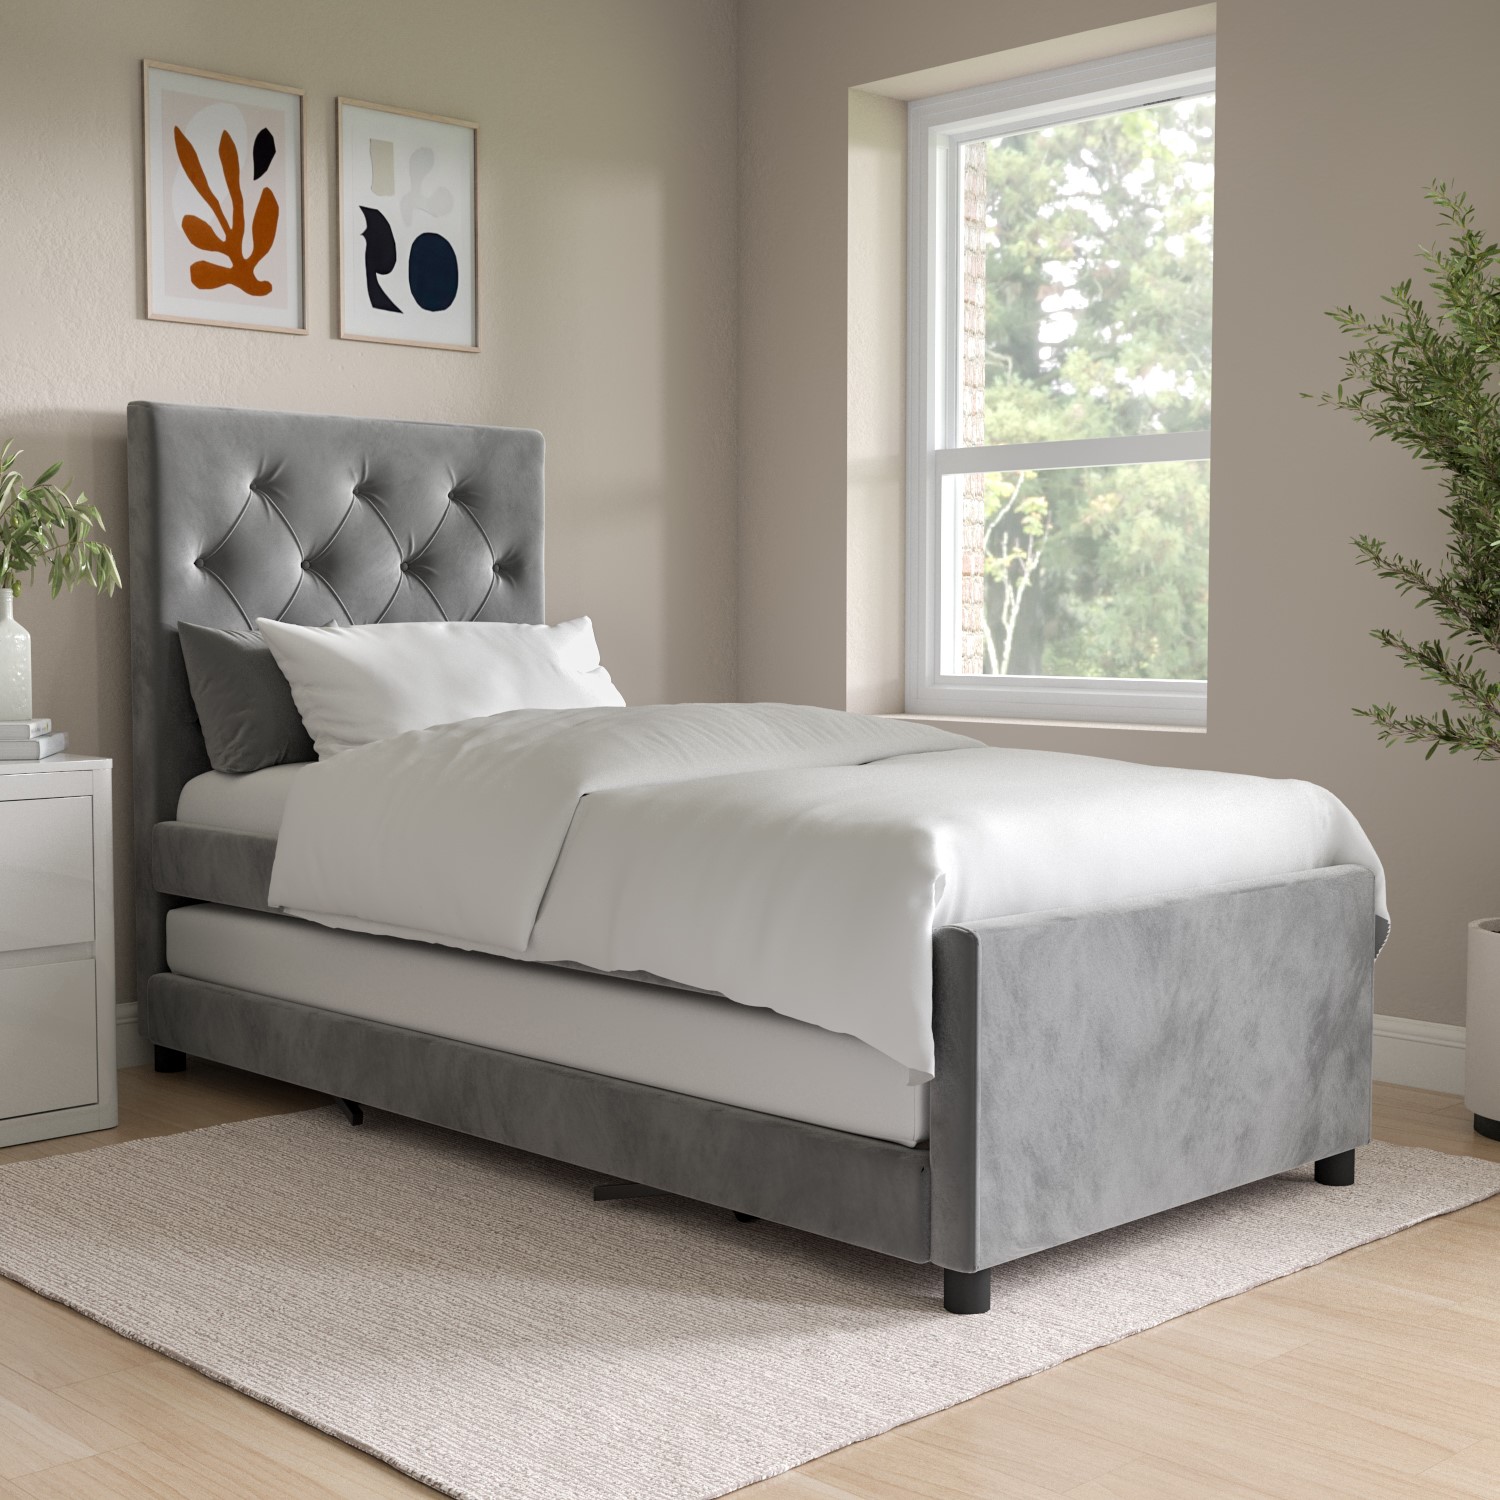 Read more about Single grey velvet guest bed with trundle isabel